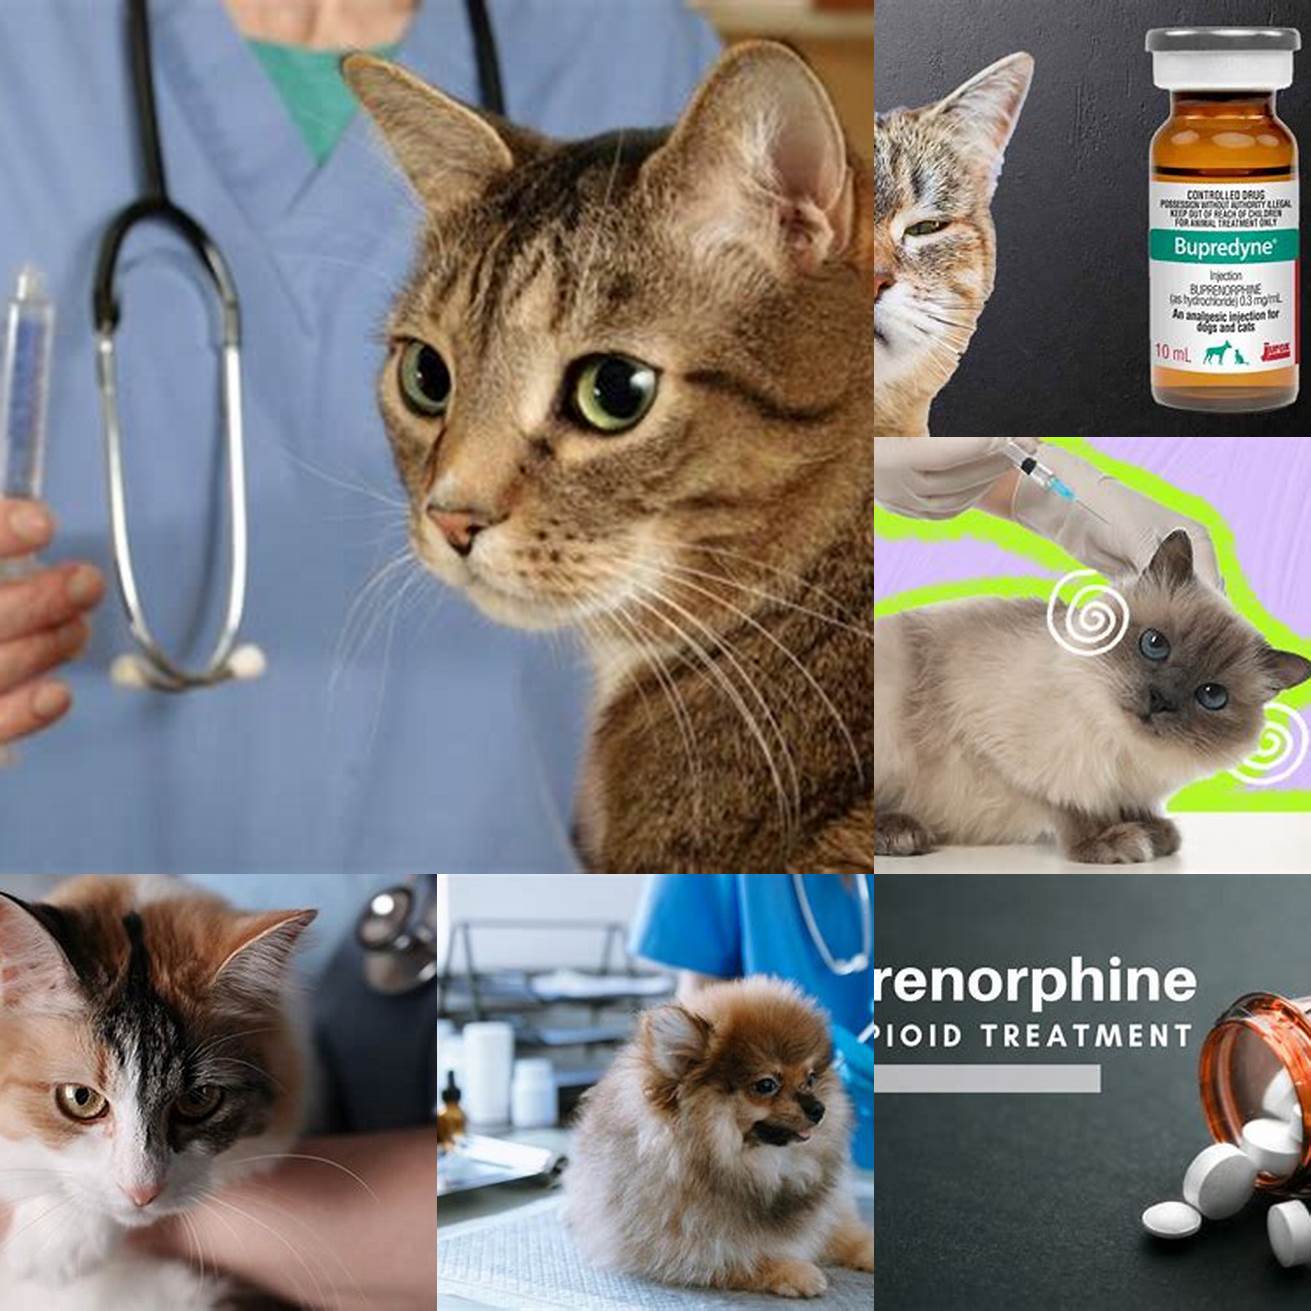 Cat PlayingAfter receiving the proper dose of buprenorphine your cat should start to feel more comfortable and may resume normal activities such as playing and eating